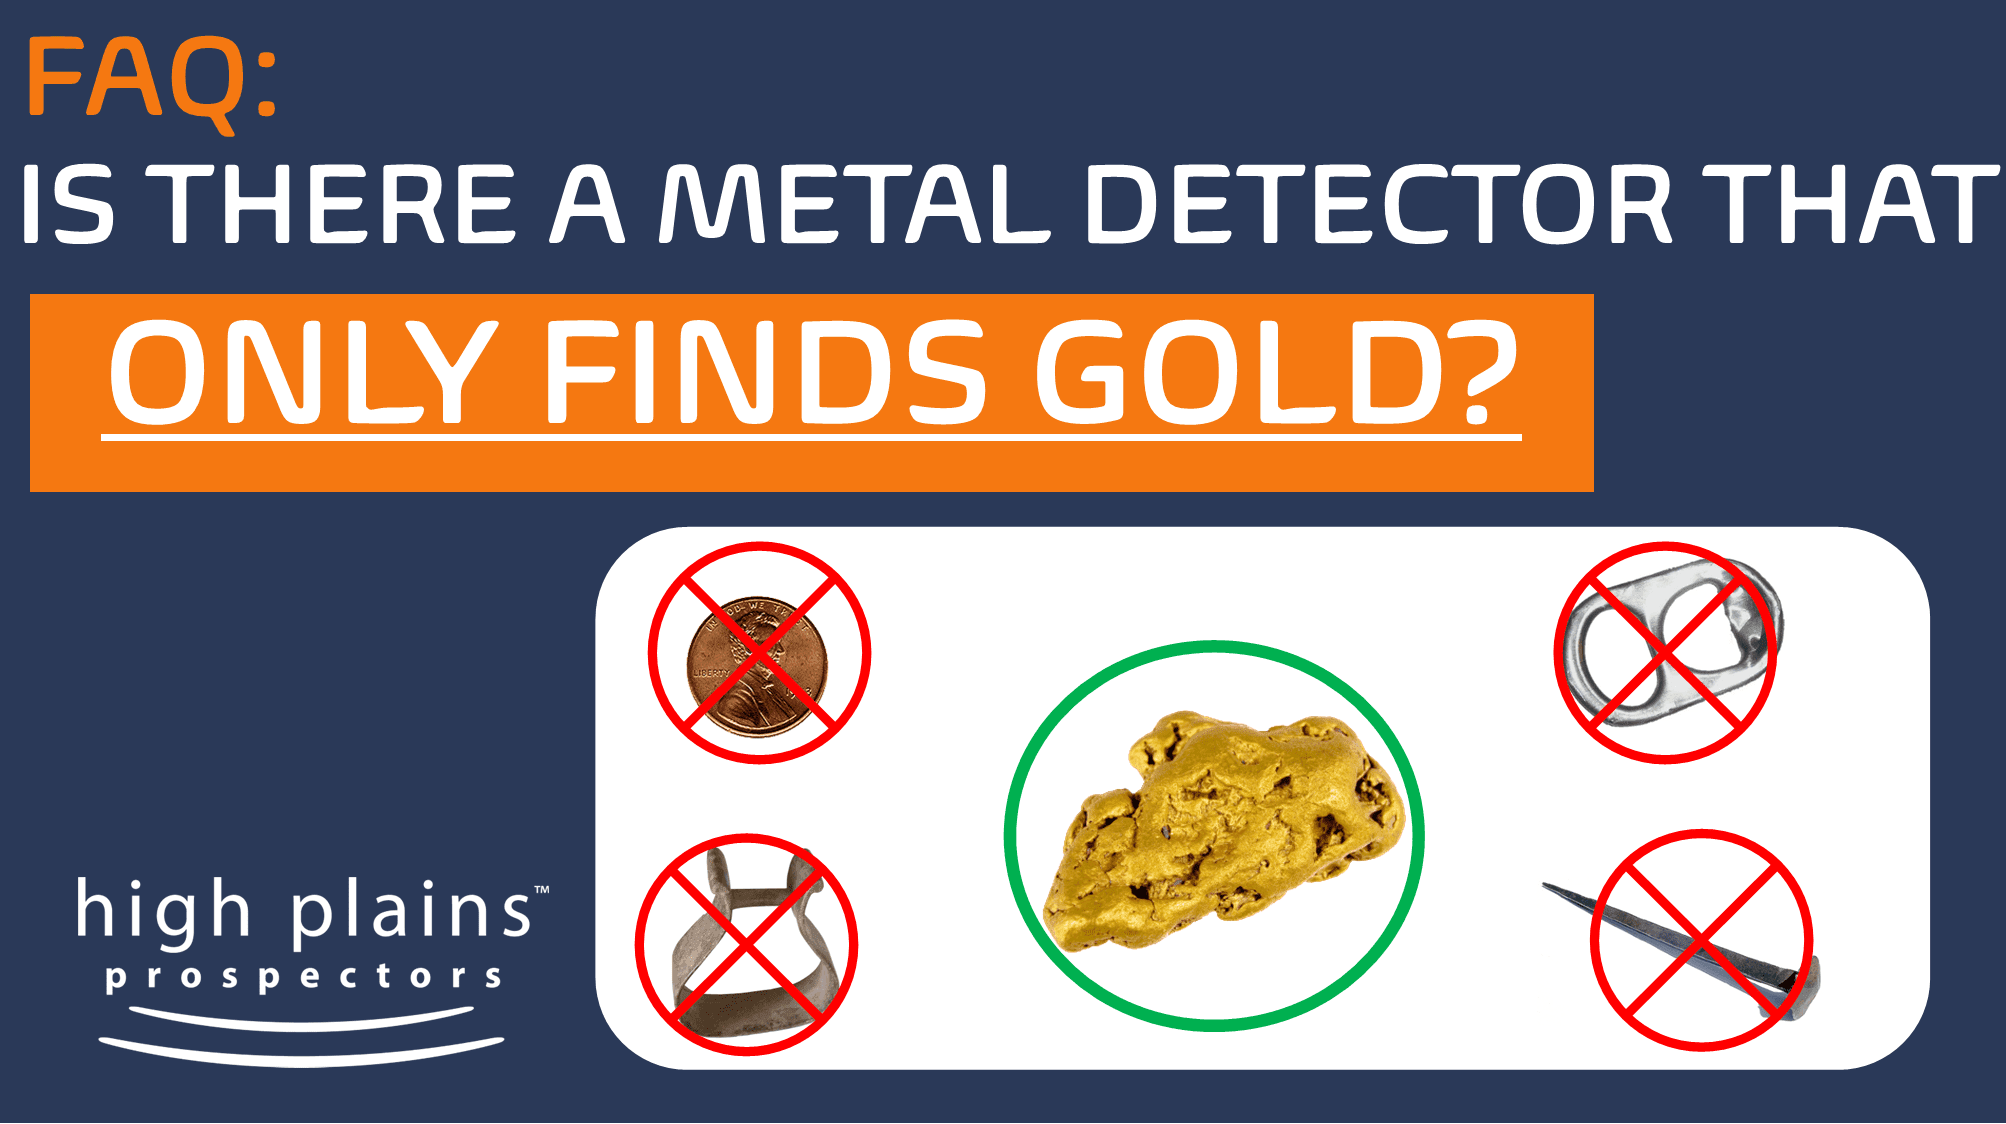 What makes a metal detector a gold detector?